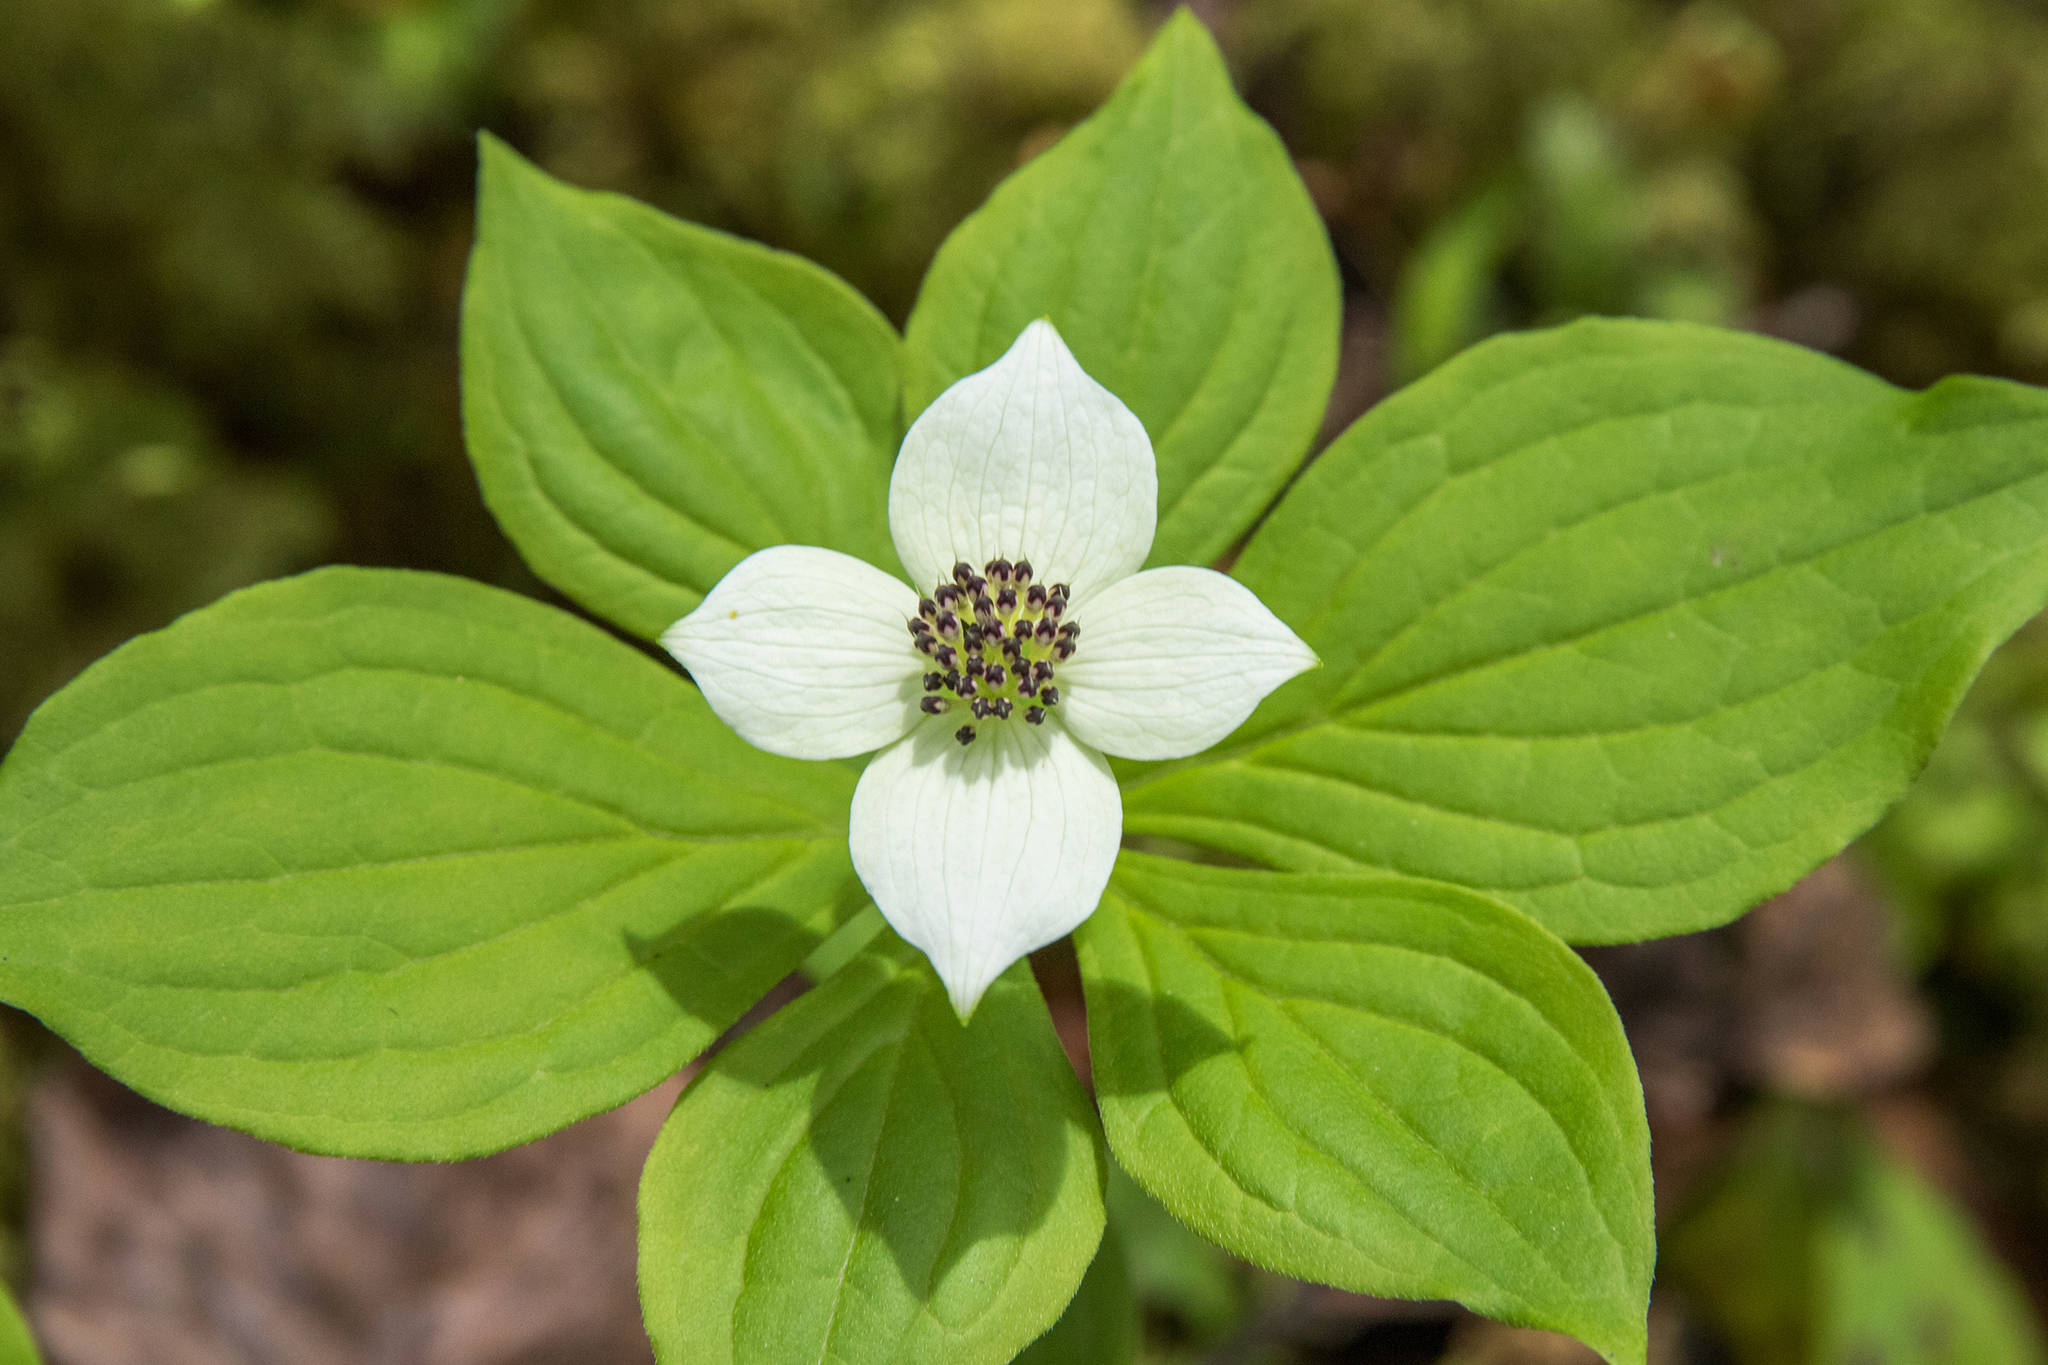 The showy white bracts of dwarf dogwood surround a cluster of flowers that are just starting to open. (Courtesy Photo / Kerry Howard)